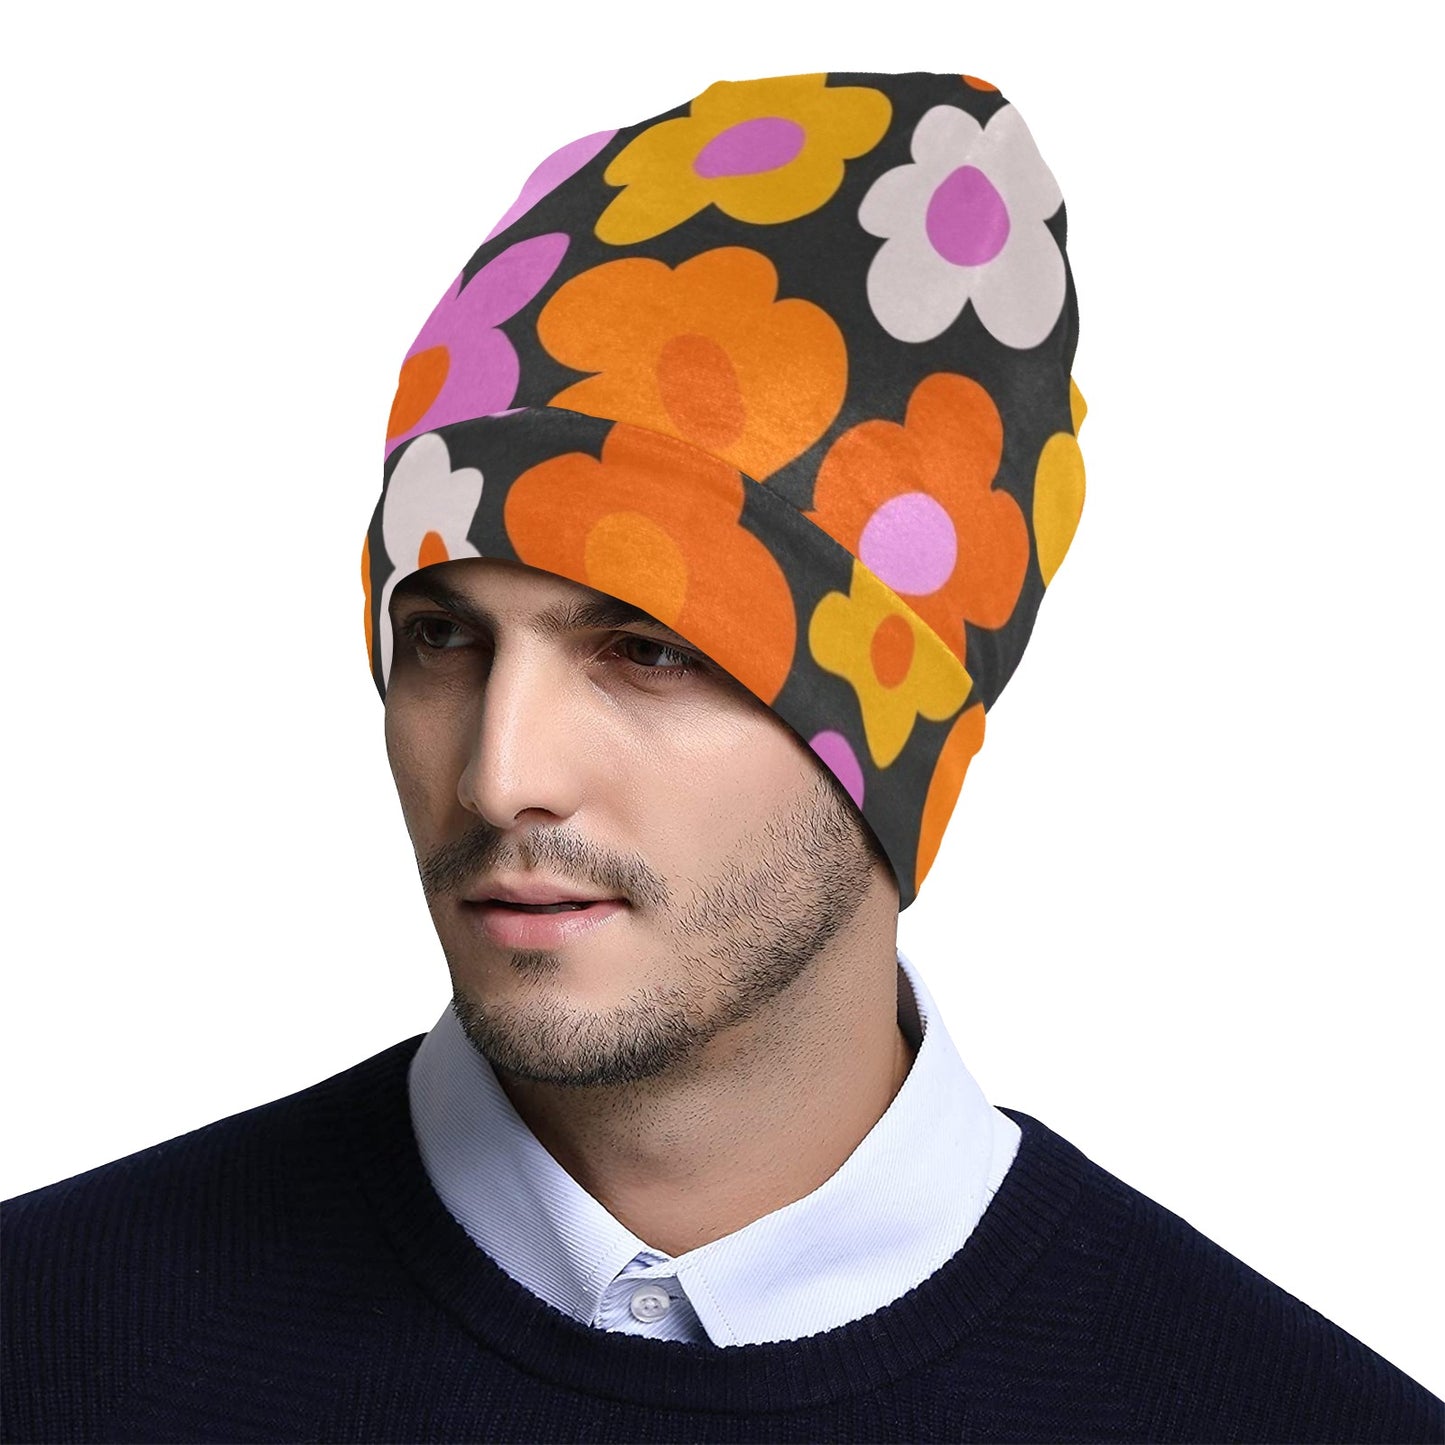 Groovy Flowers Beanie, Floral Soft Fleece Party Men Women Cute Stretchy Winter Adult Aesthetic Cap Hat Gift